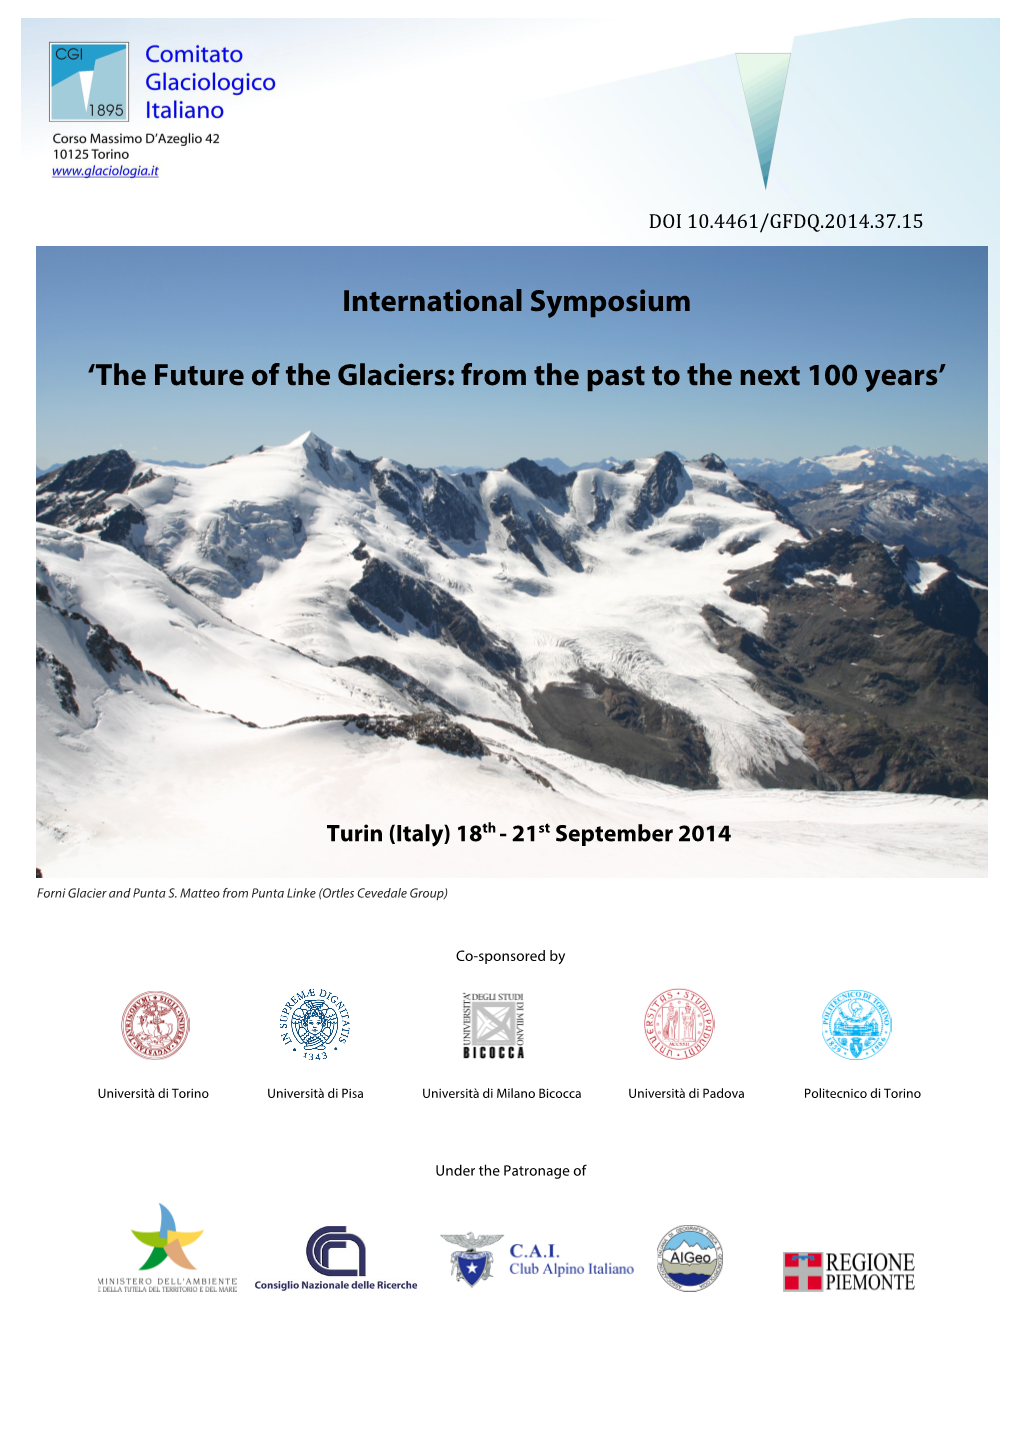 The Future of the Glaciers: from the Past to the Next 100 Years’